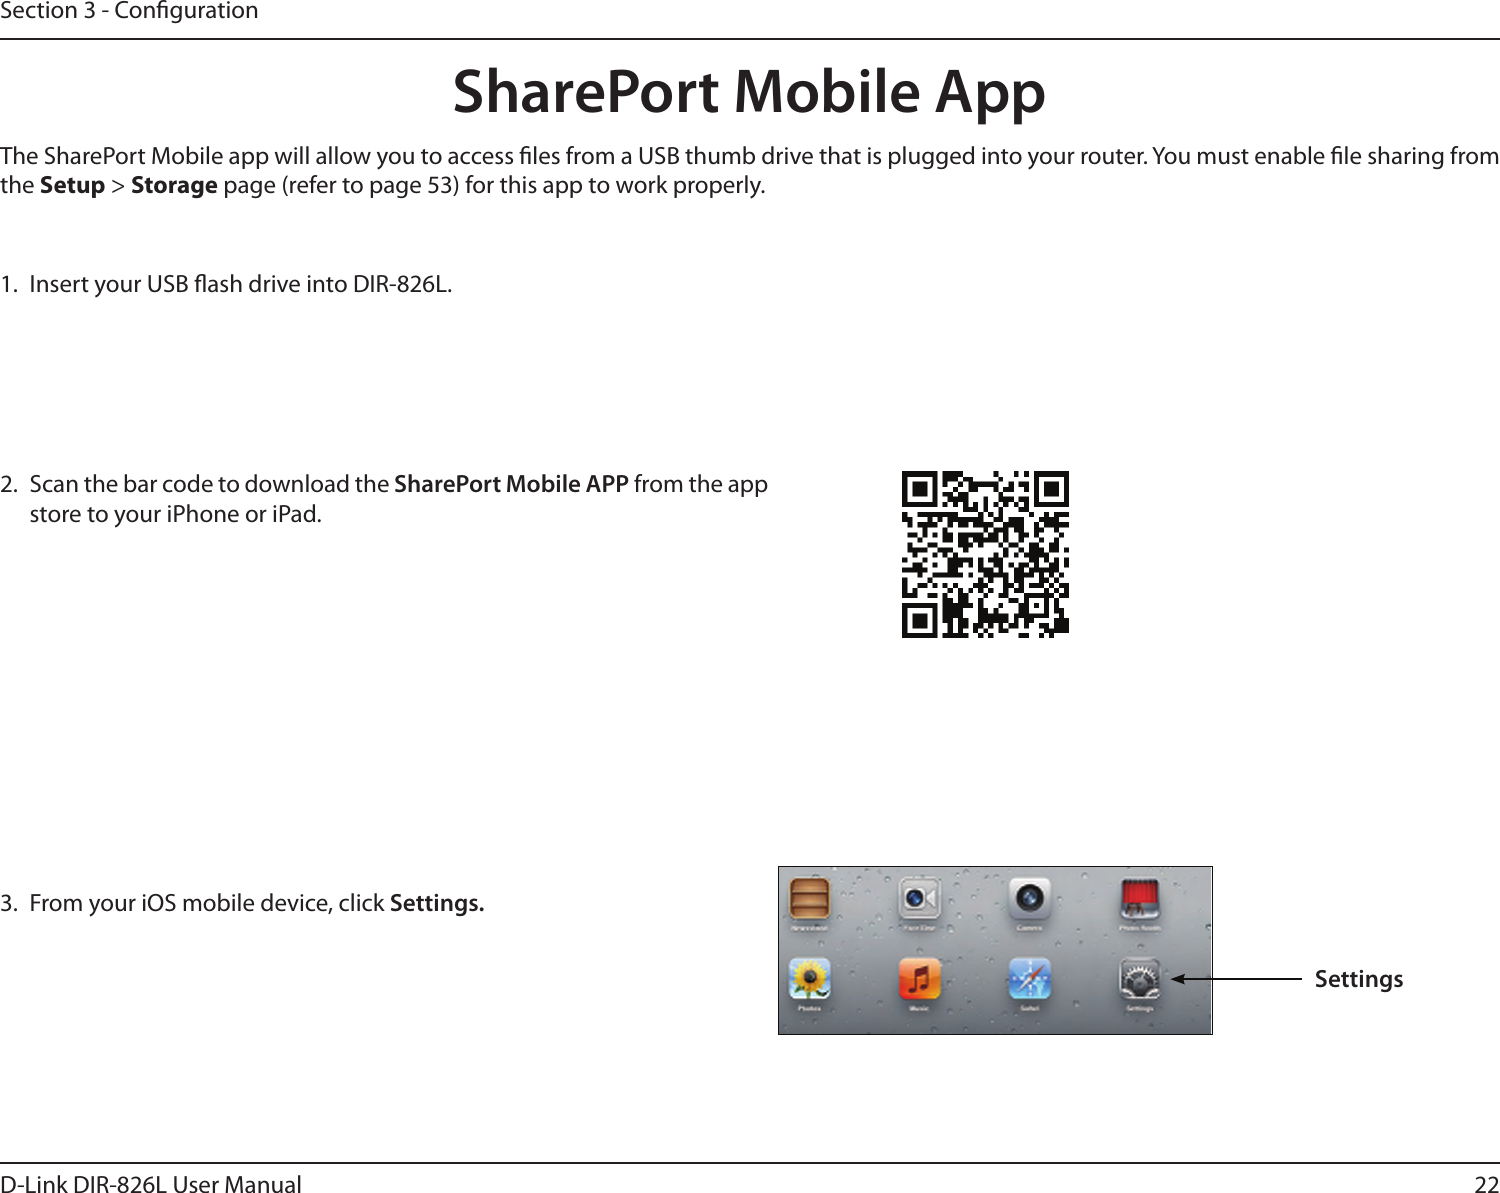 22D-Link DIR-826L User ManualSection 3 - Conguration1.  Insert your USB ash drive into DIR-826L.2.  Scan the bar code to download the SharePort Mobile APP from the app store to your iPhone or iPad.SharePort Mobile App3.  From your iOS mobile device, click Settings. The SharePort Mobile app will allow you to access les from a USB thumb drive that is plugged into your router. You must enable le sharing from the Setup &gt; Storage page (refer to page 53) for this app to work properly.Settings